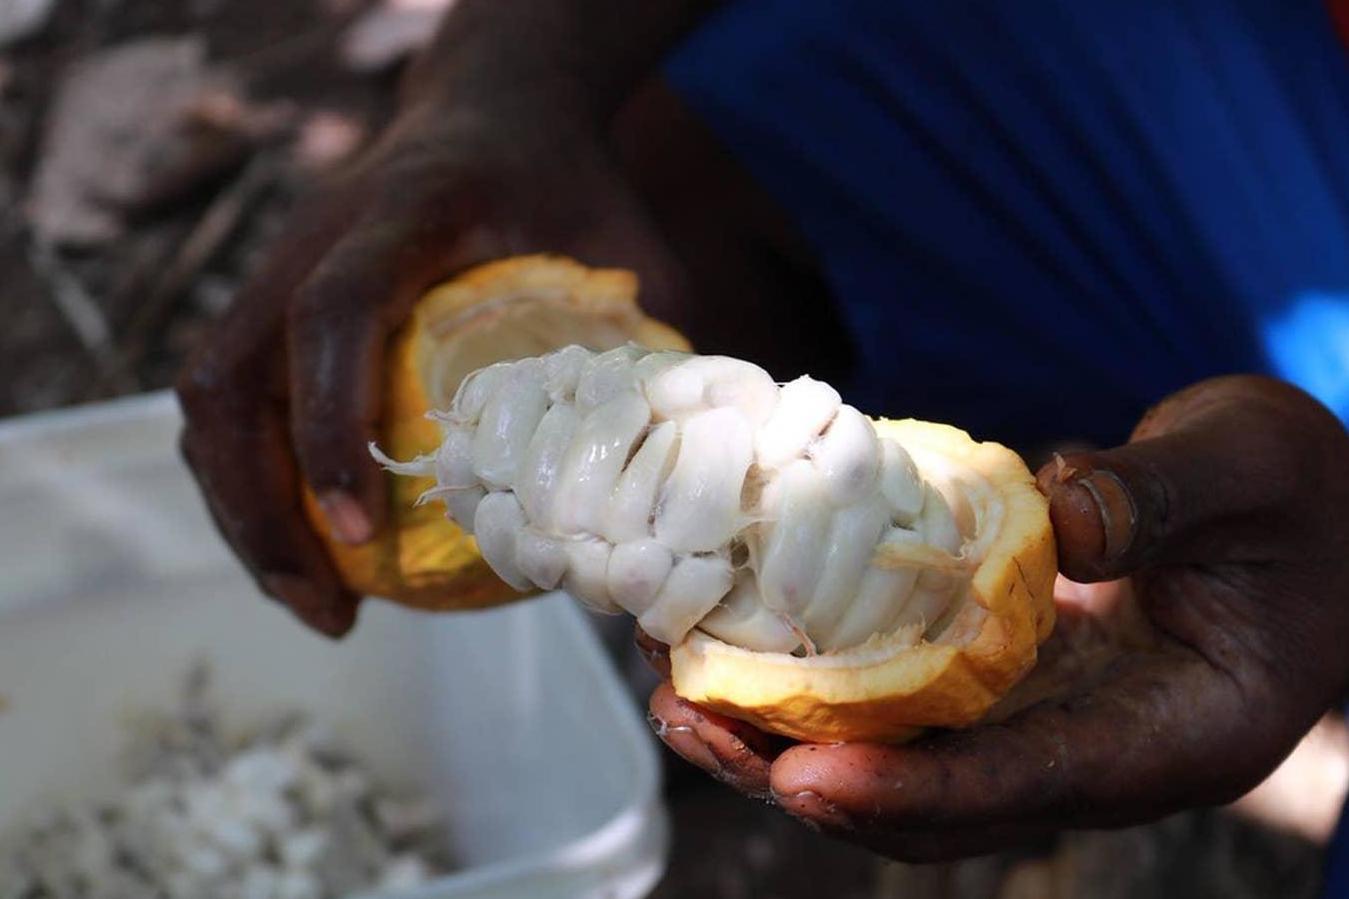 The pulp that surrounds cocoa beans is soft, sweet and white in colour (Nestlé)